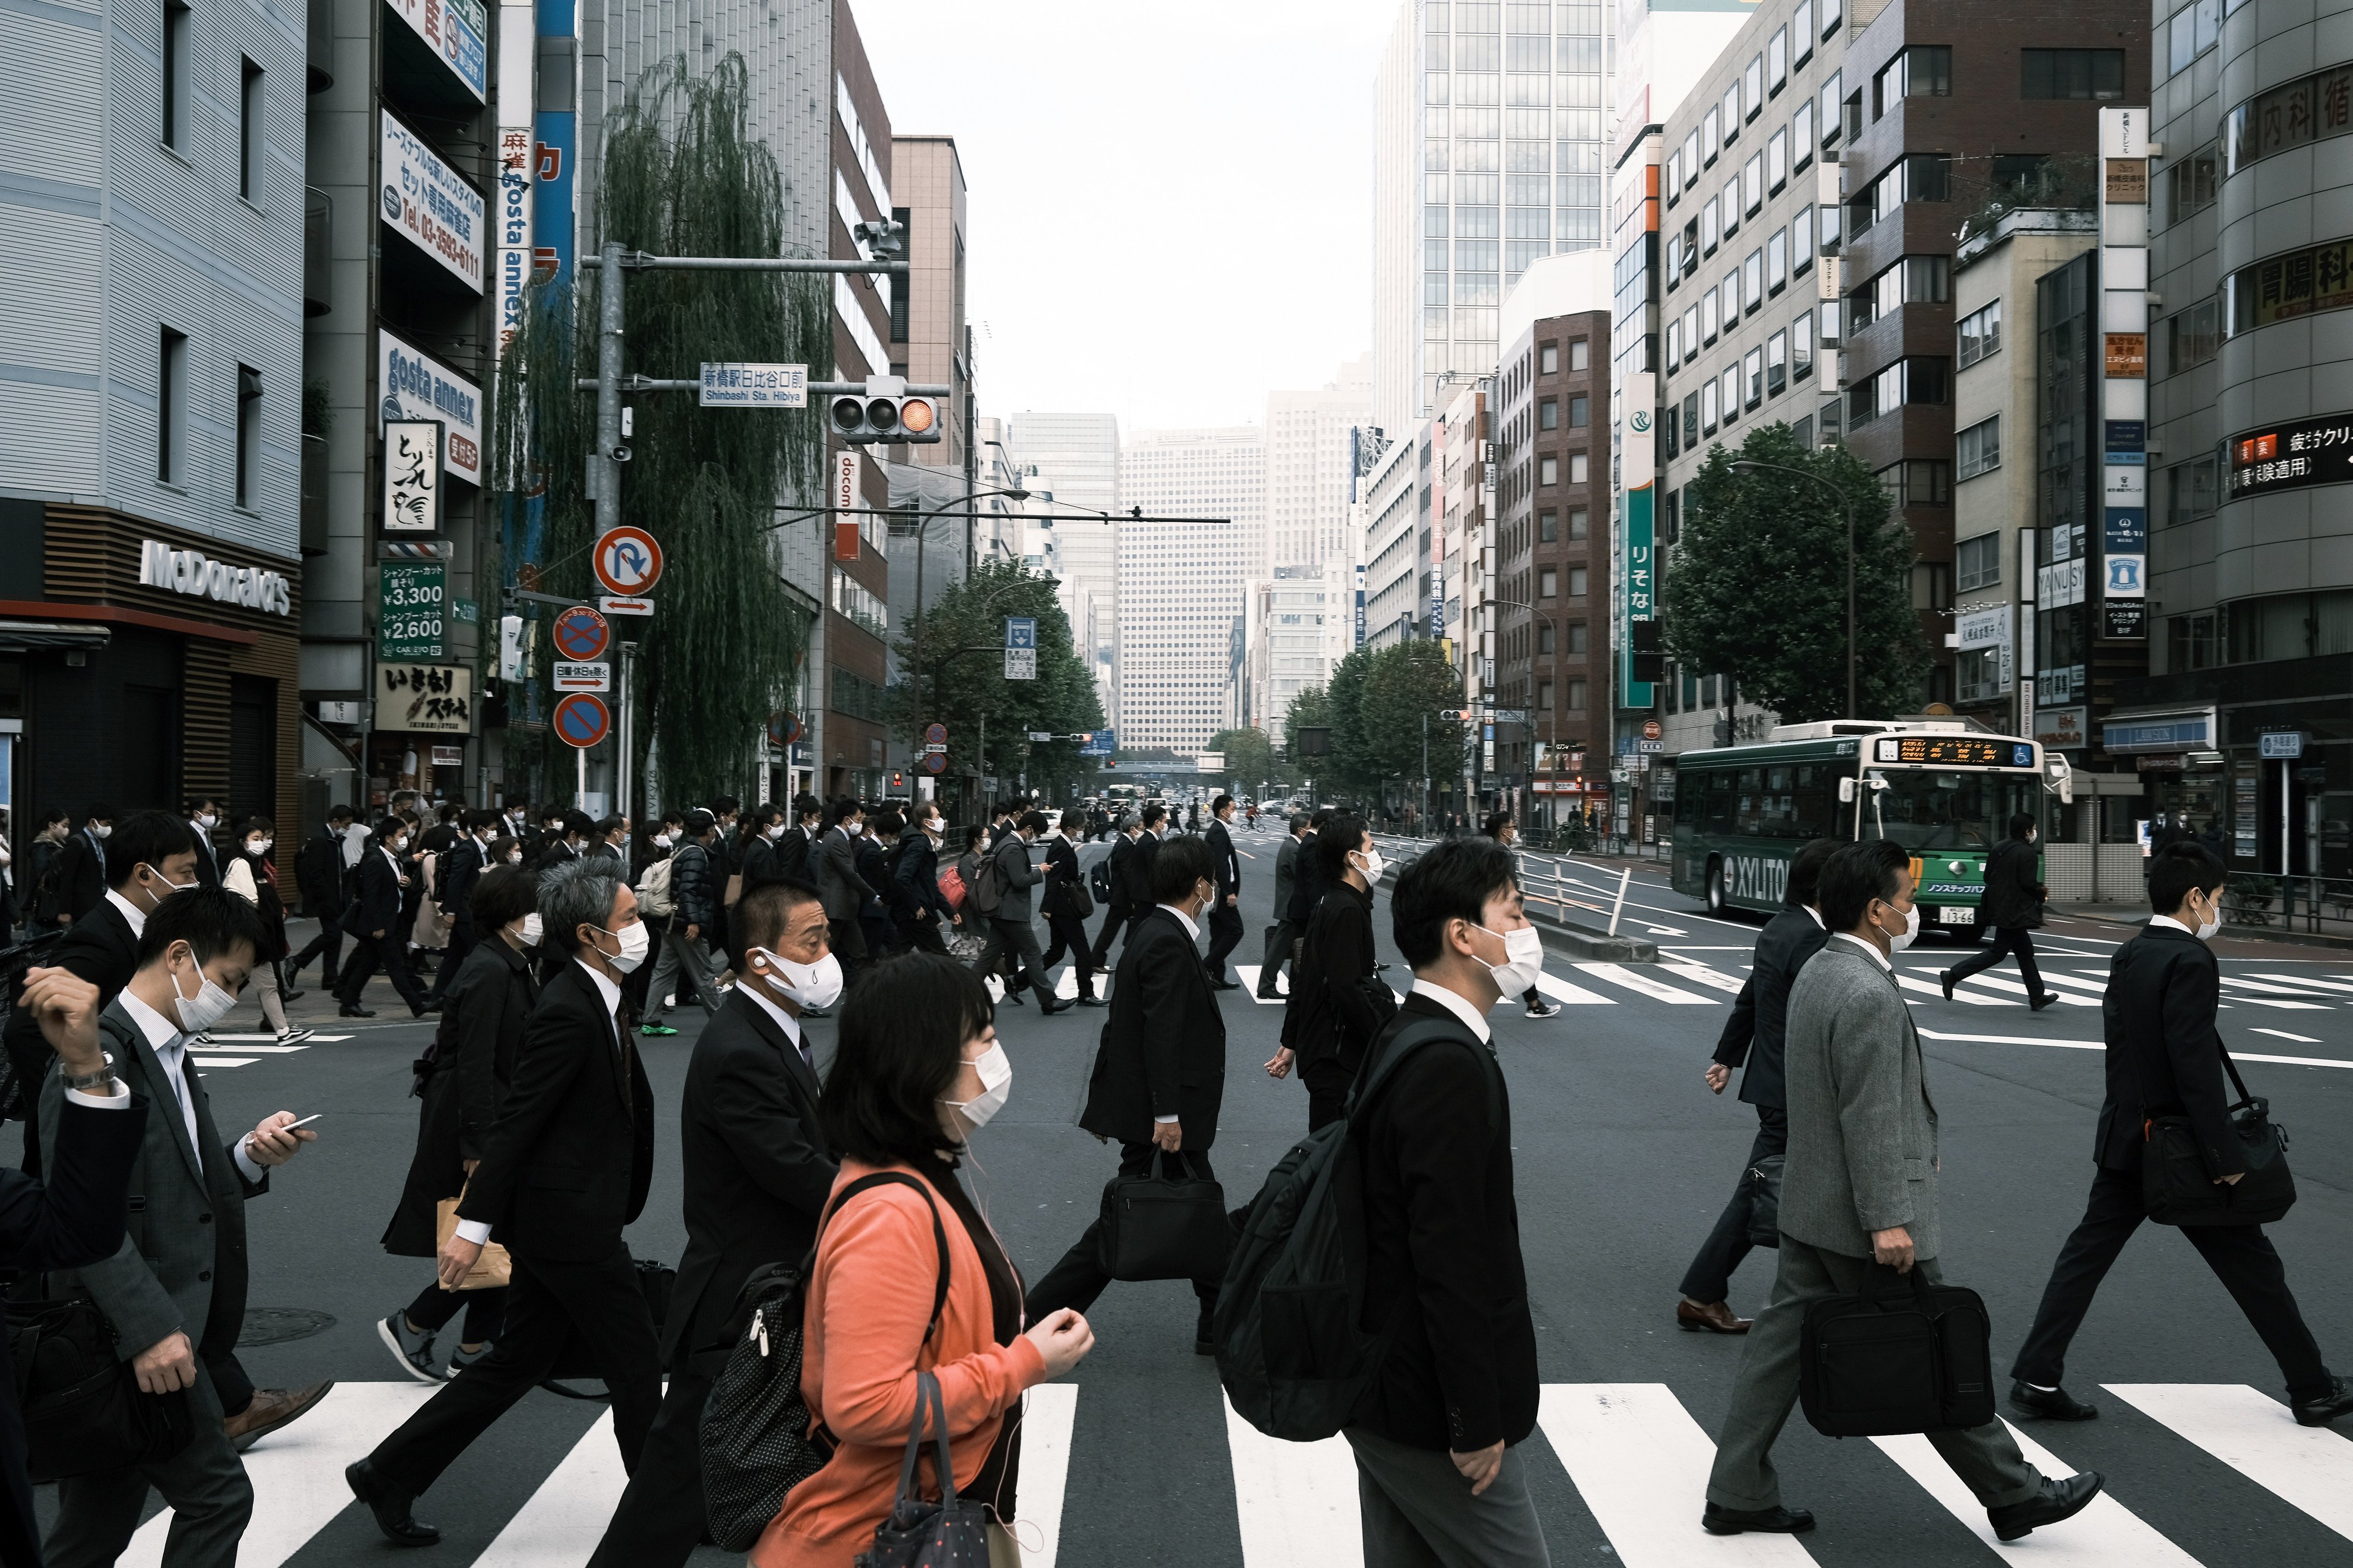 Women in Japan often find it particularly difficult to balance work and household duties. Photo: Bloomberg